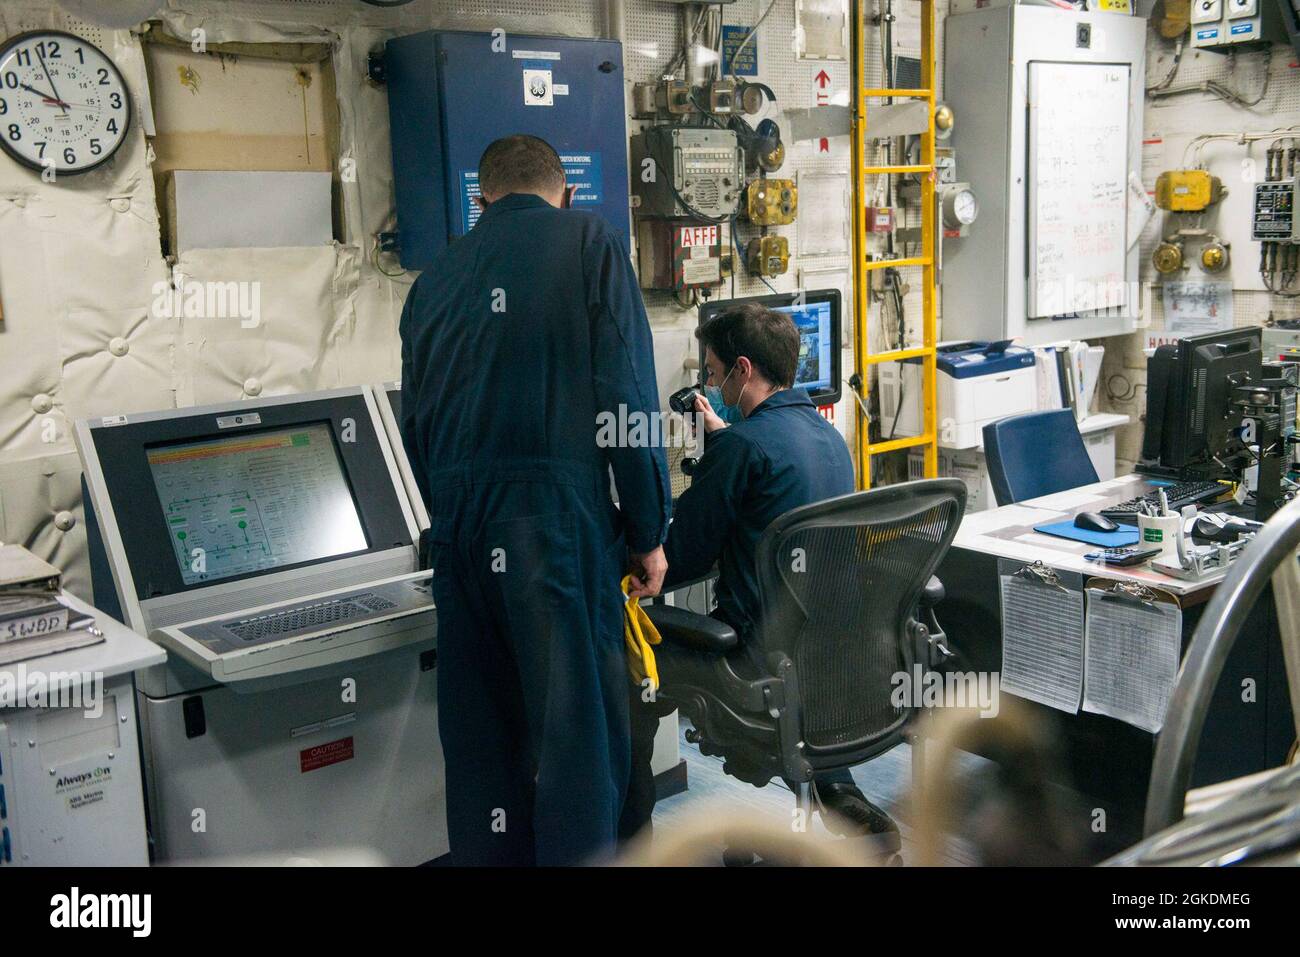 210323-N-EI510-0033 GAETA, Italy (March 23, 2021) Military Sealift Command civil service mariners monitor a repair aboard the Blue Ridge-class command and control ship USS Mount Whitney (LCC 20) in Gaeta, Italy, March 23, 2021. Mount Whitney, forward deployed to Gaeta, Italy operates with a combined crew of Sailors and Military Sealift Command civil service mariners in the U.S. Sixth Fleet area of operations in support of U.S. national security interests in Europe and Africa. Stock Photo